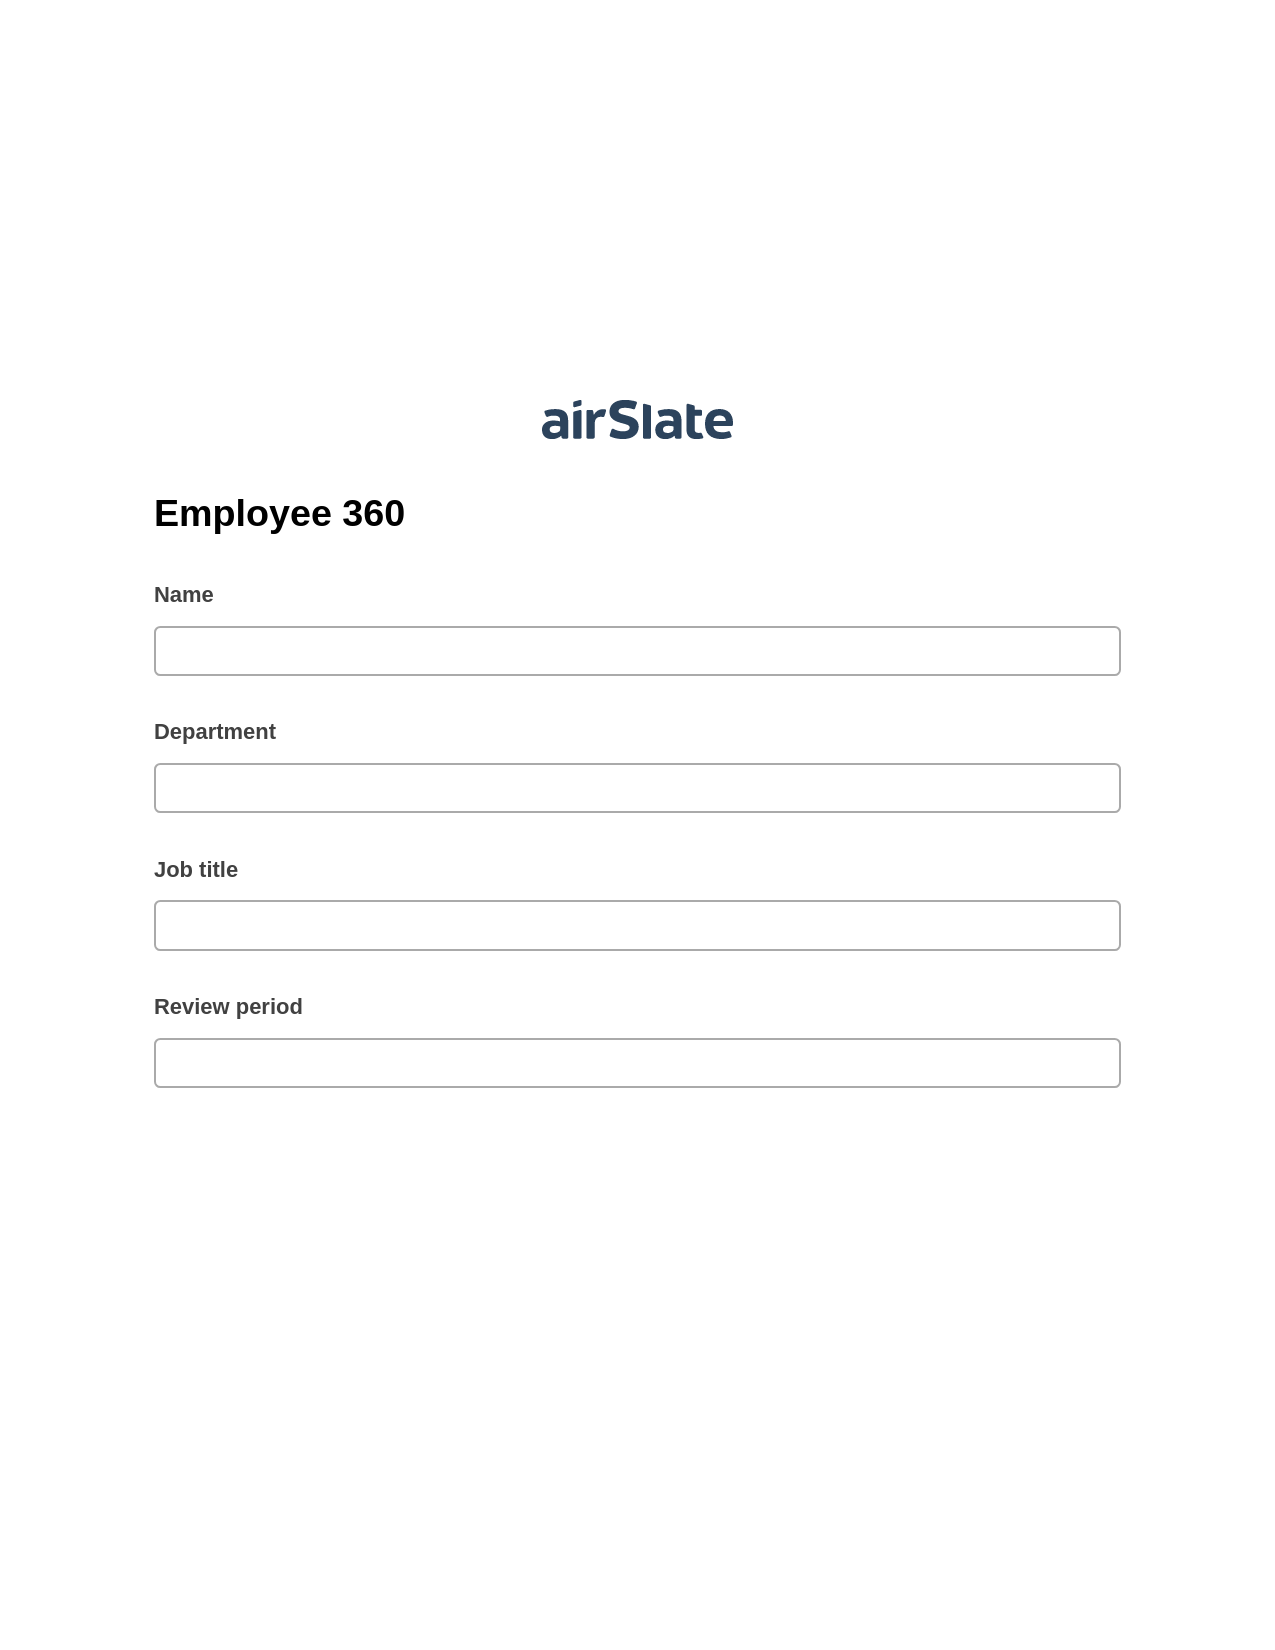 Multirole Employee 360 Pre-fill from Salesforce Records with SOQL Bot, Update MS Dynamics 365 Record Bot, Email Notification Postfinish Bot